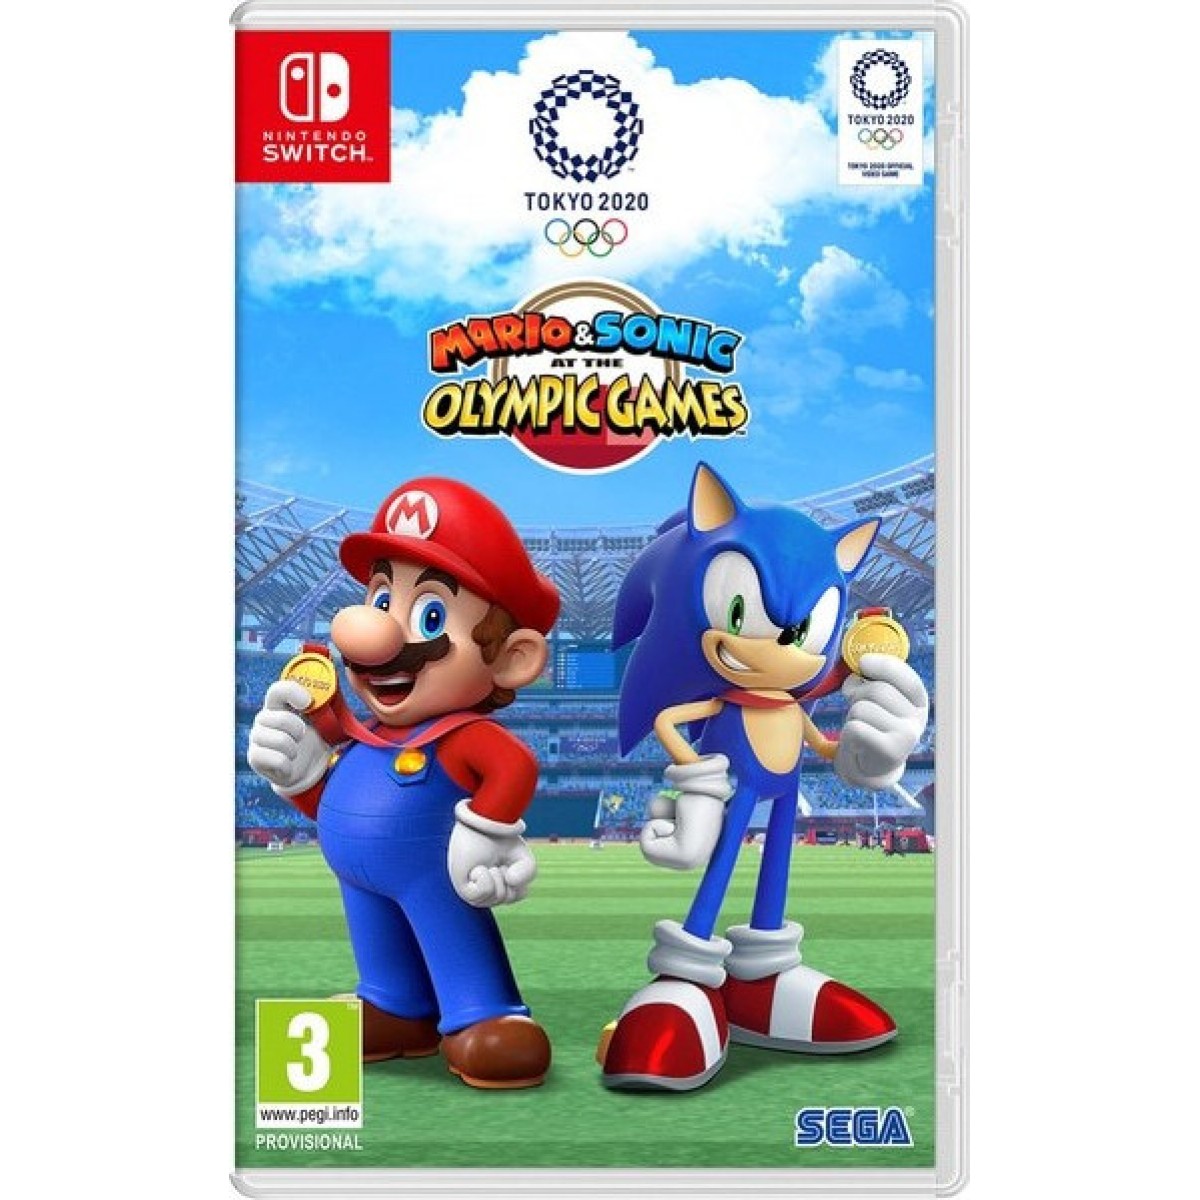 NINTENDO SWITCH MARIO&SONIC AT THE TOKYO 2020 OLYMPIC GAMES GAME